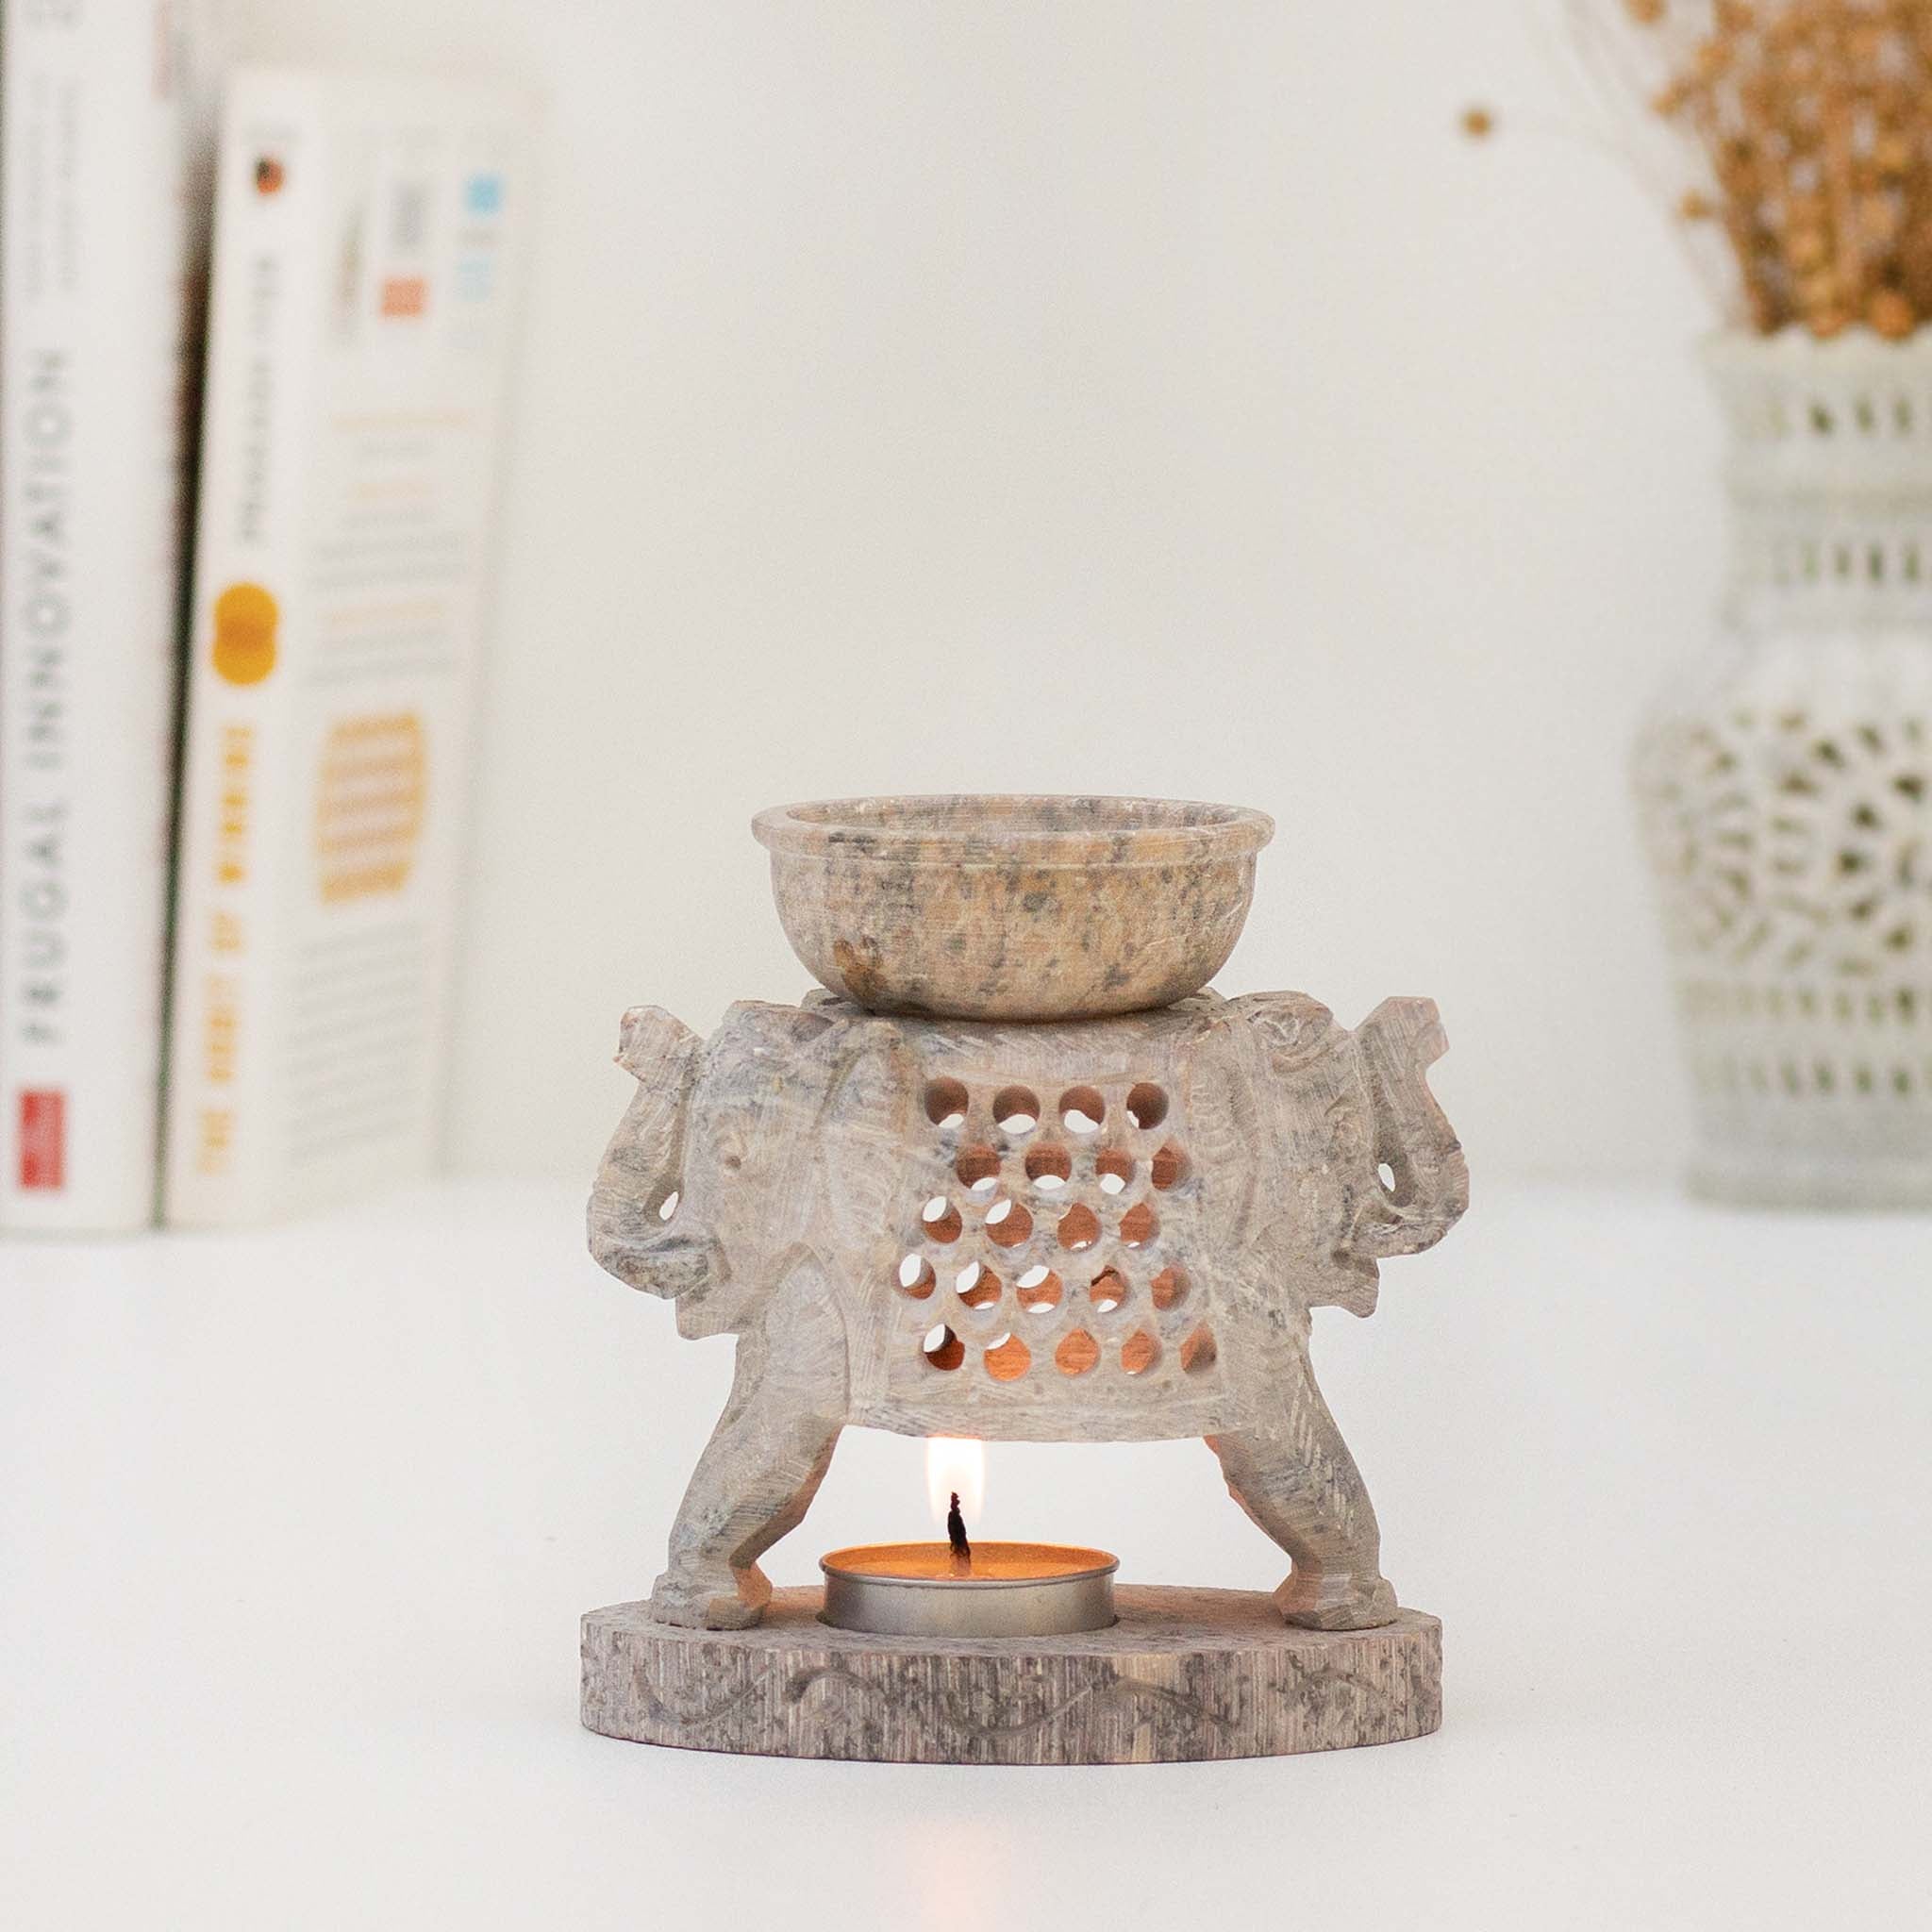 Soapstone diffuser featuring two elephant heads placed on a white surface with books, a soapstone vase of dried oats flowers and a white wall in the background.